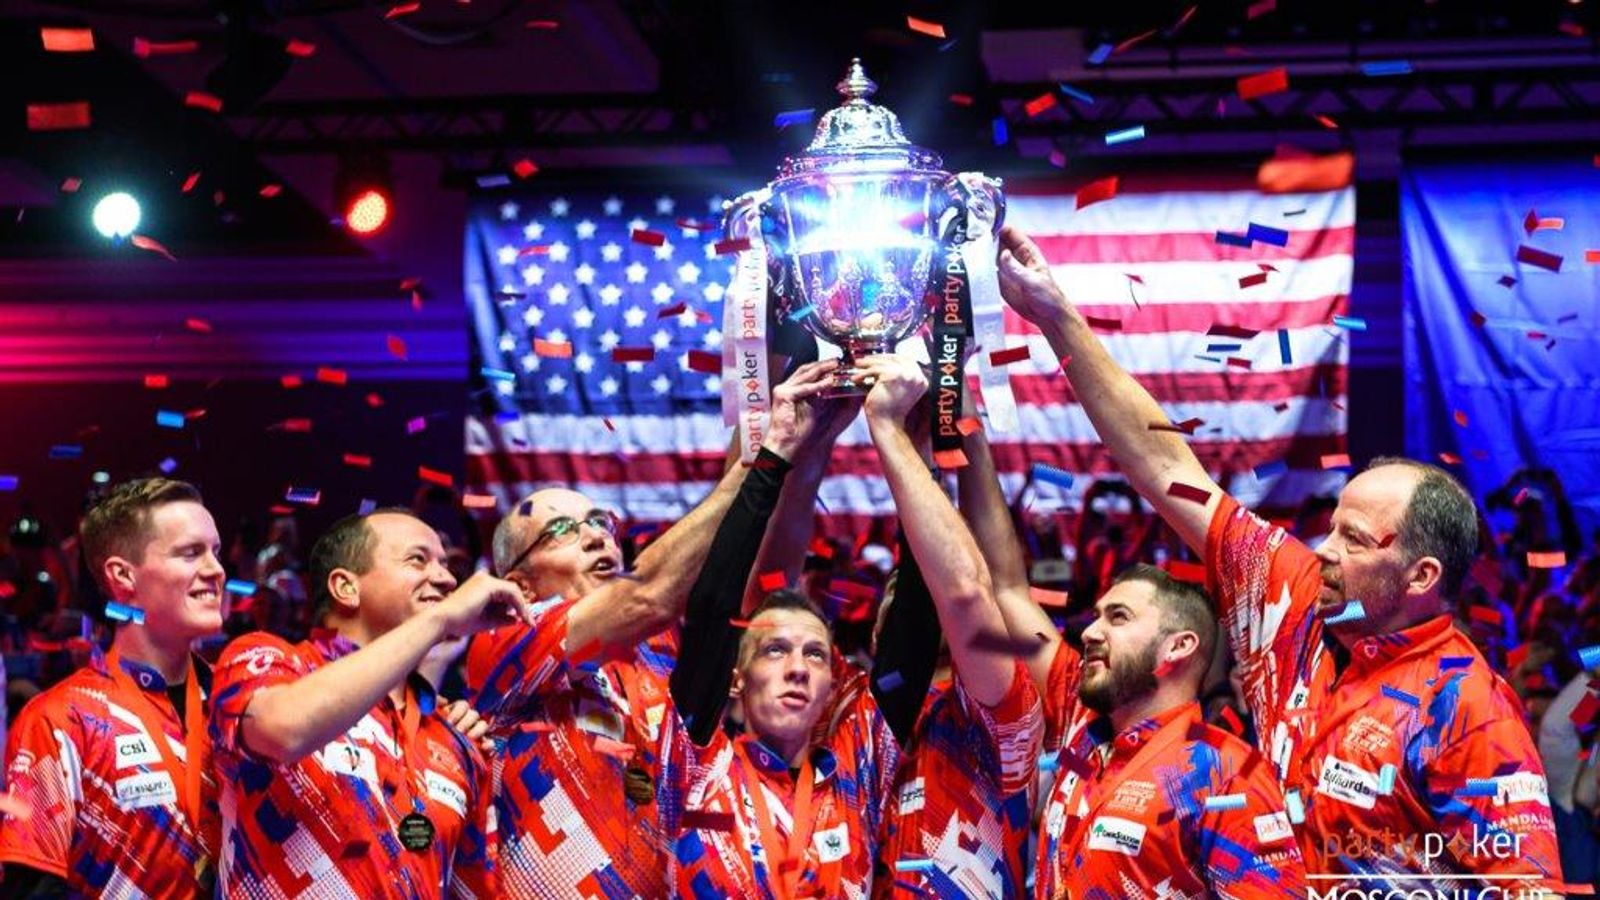 Mosconi Cup Team USA retain trophy with victory over Team Europe